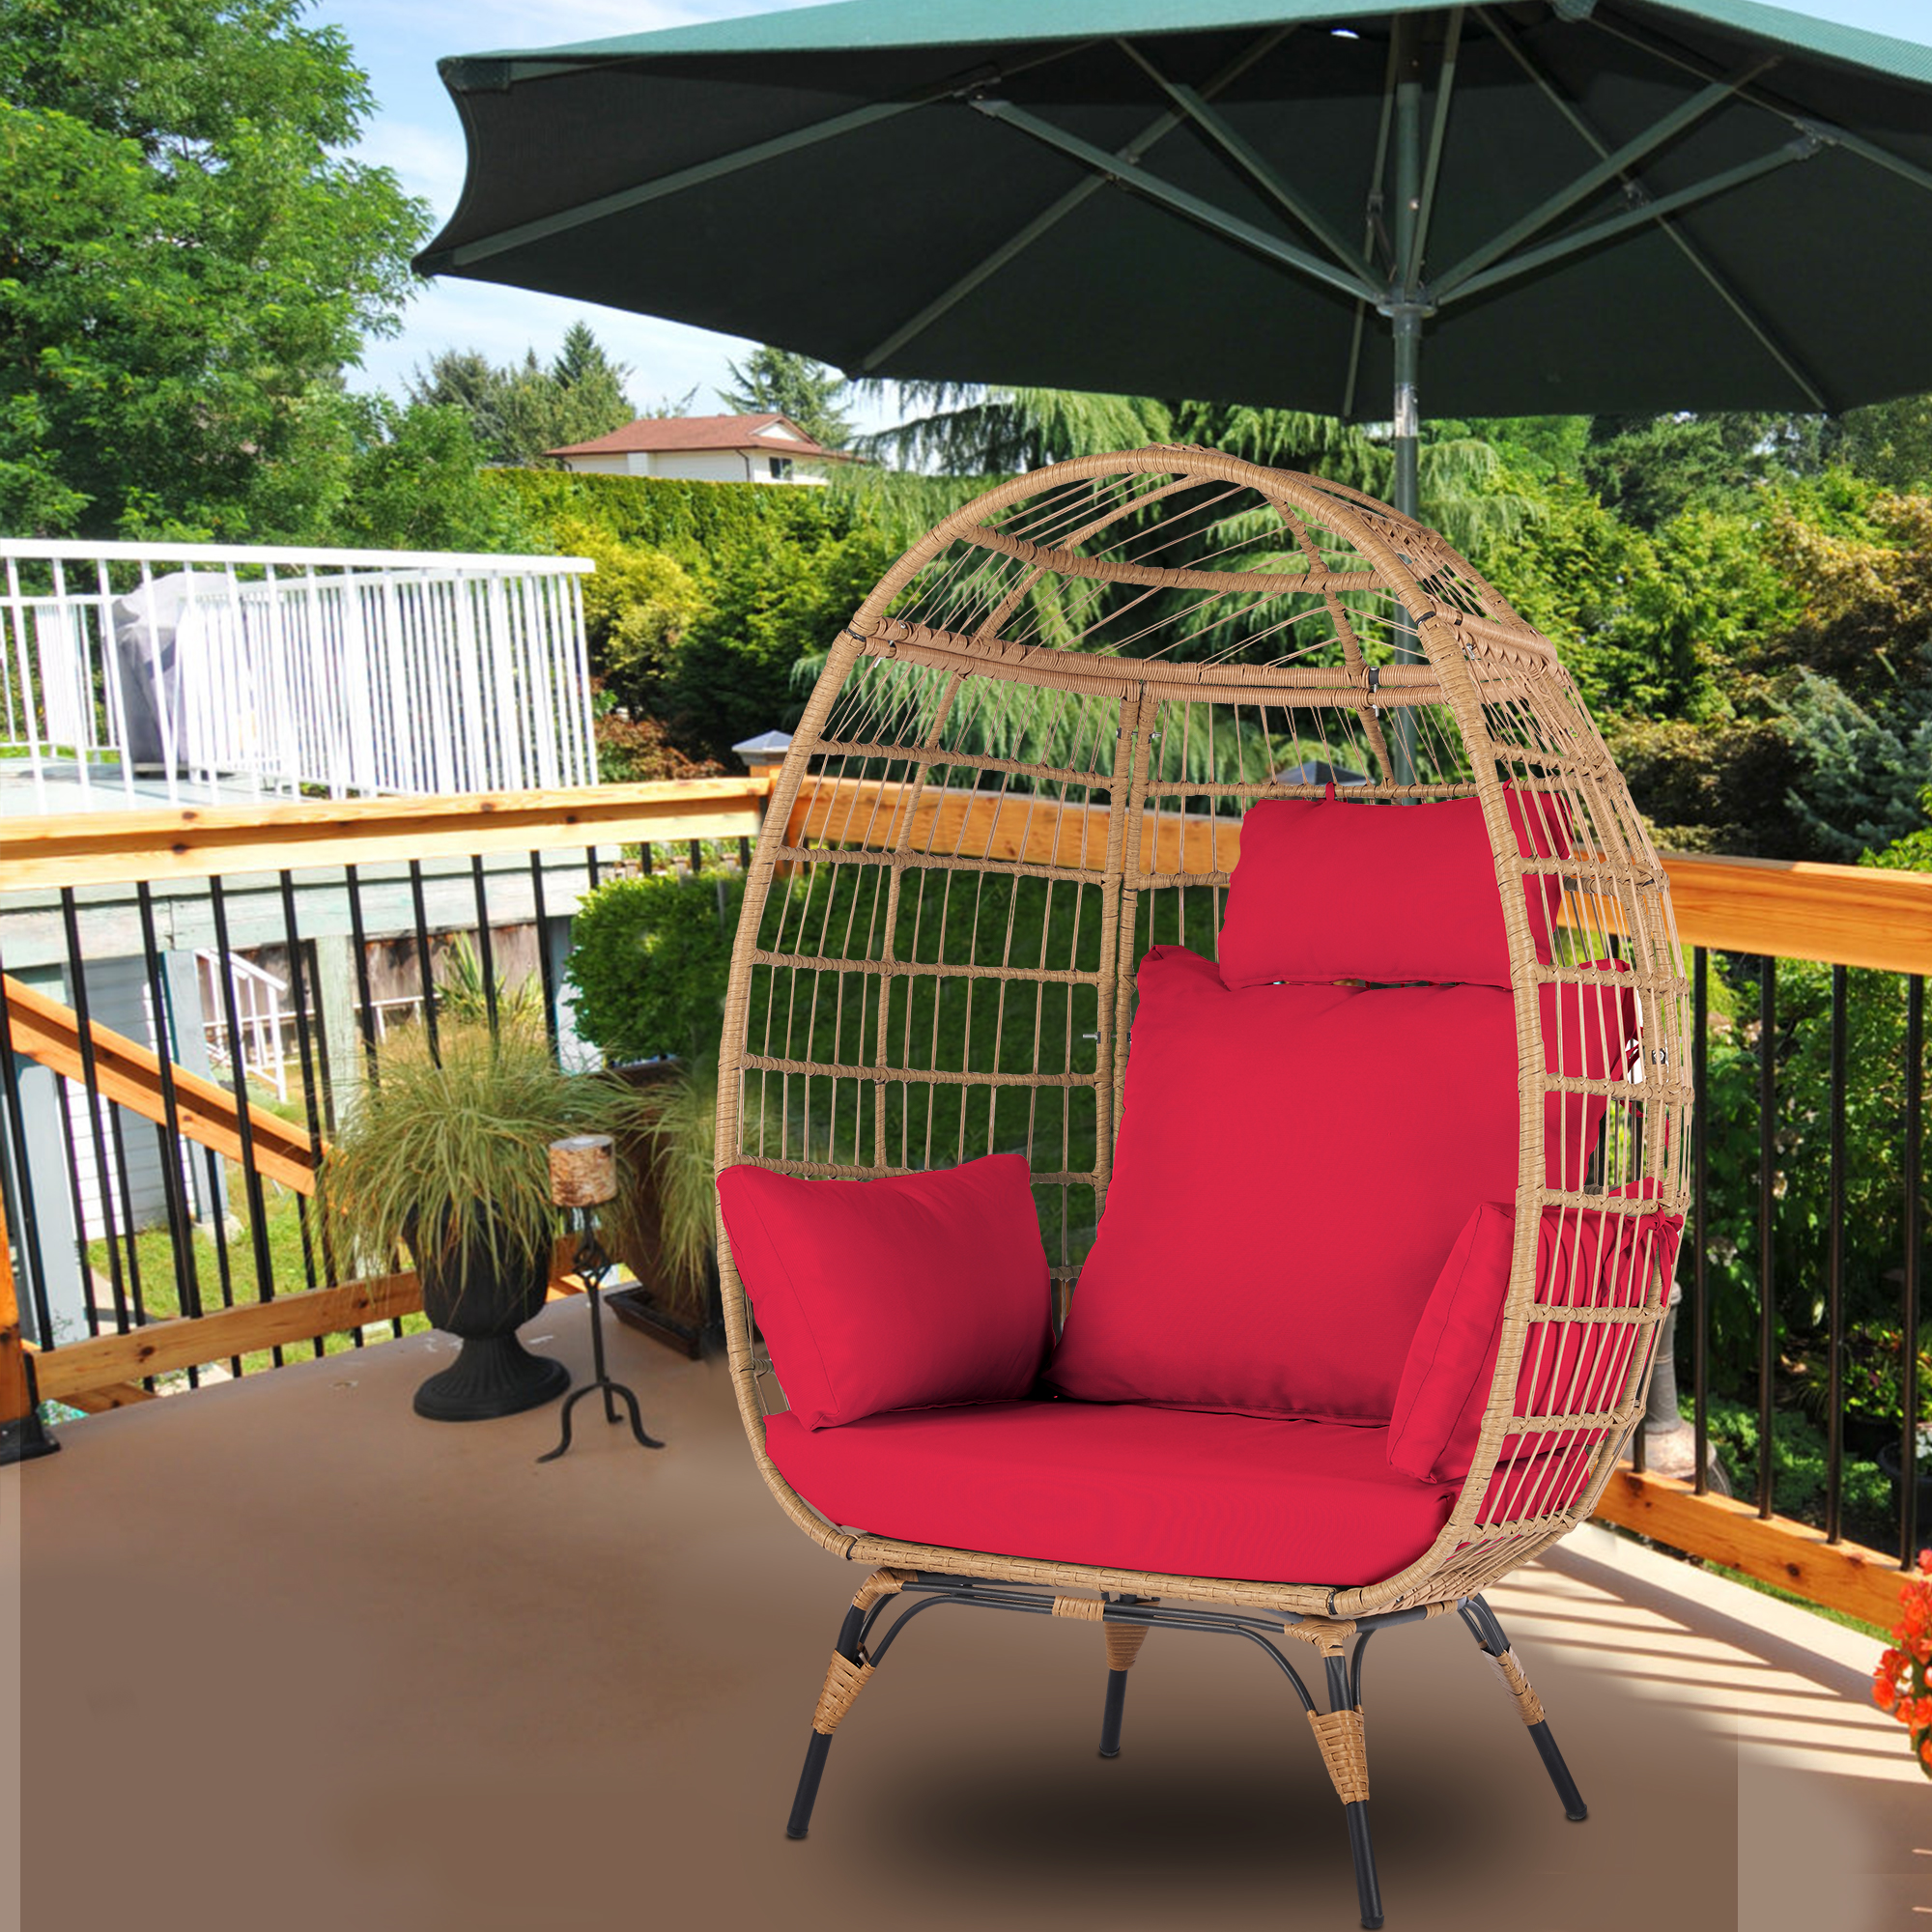 Outdoor Stationary Egg Chair, Wicker Egg Swing Chair with Red Cushions for Patio, Garden, Backyard, Rattan Standing Egg Chair - image 1 of 10